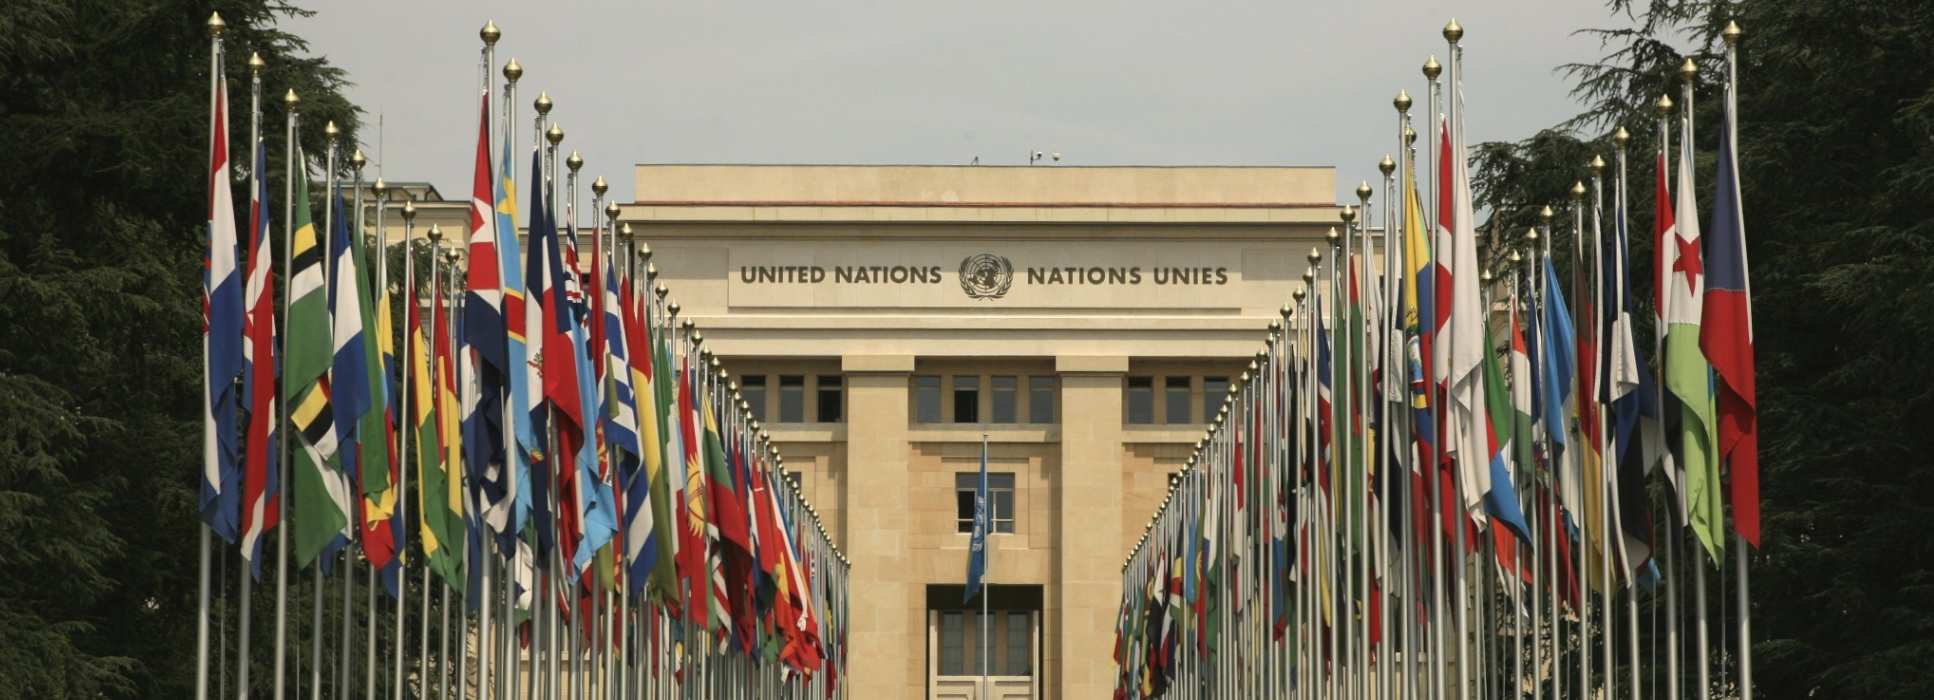 The front of a United Nations building with flags of various nations